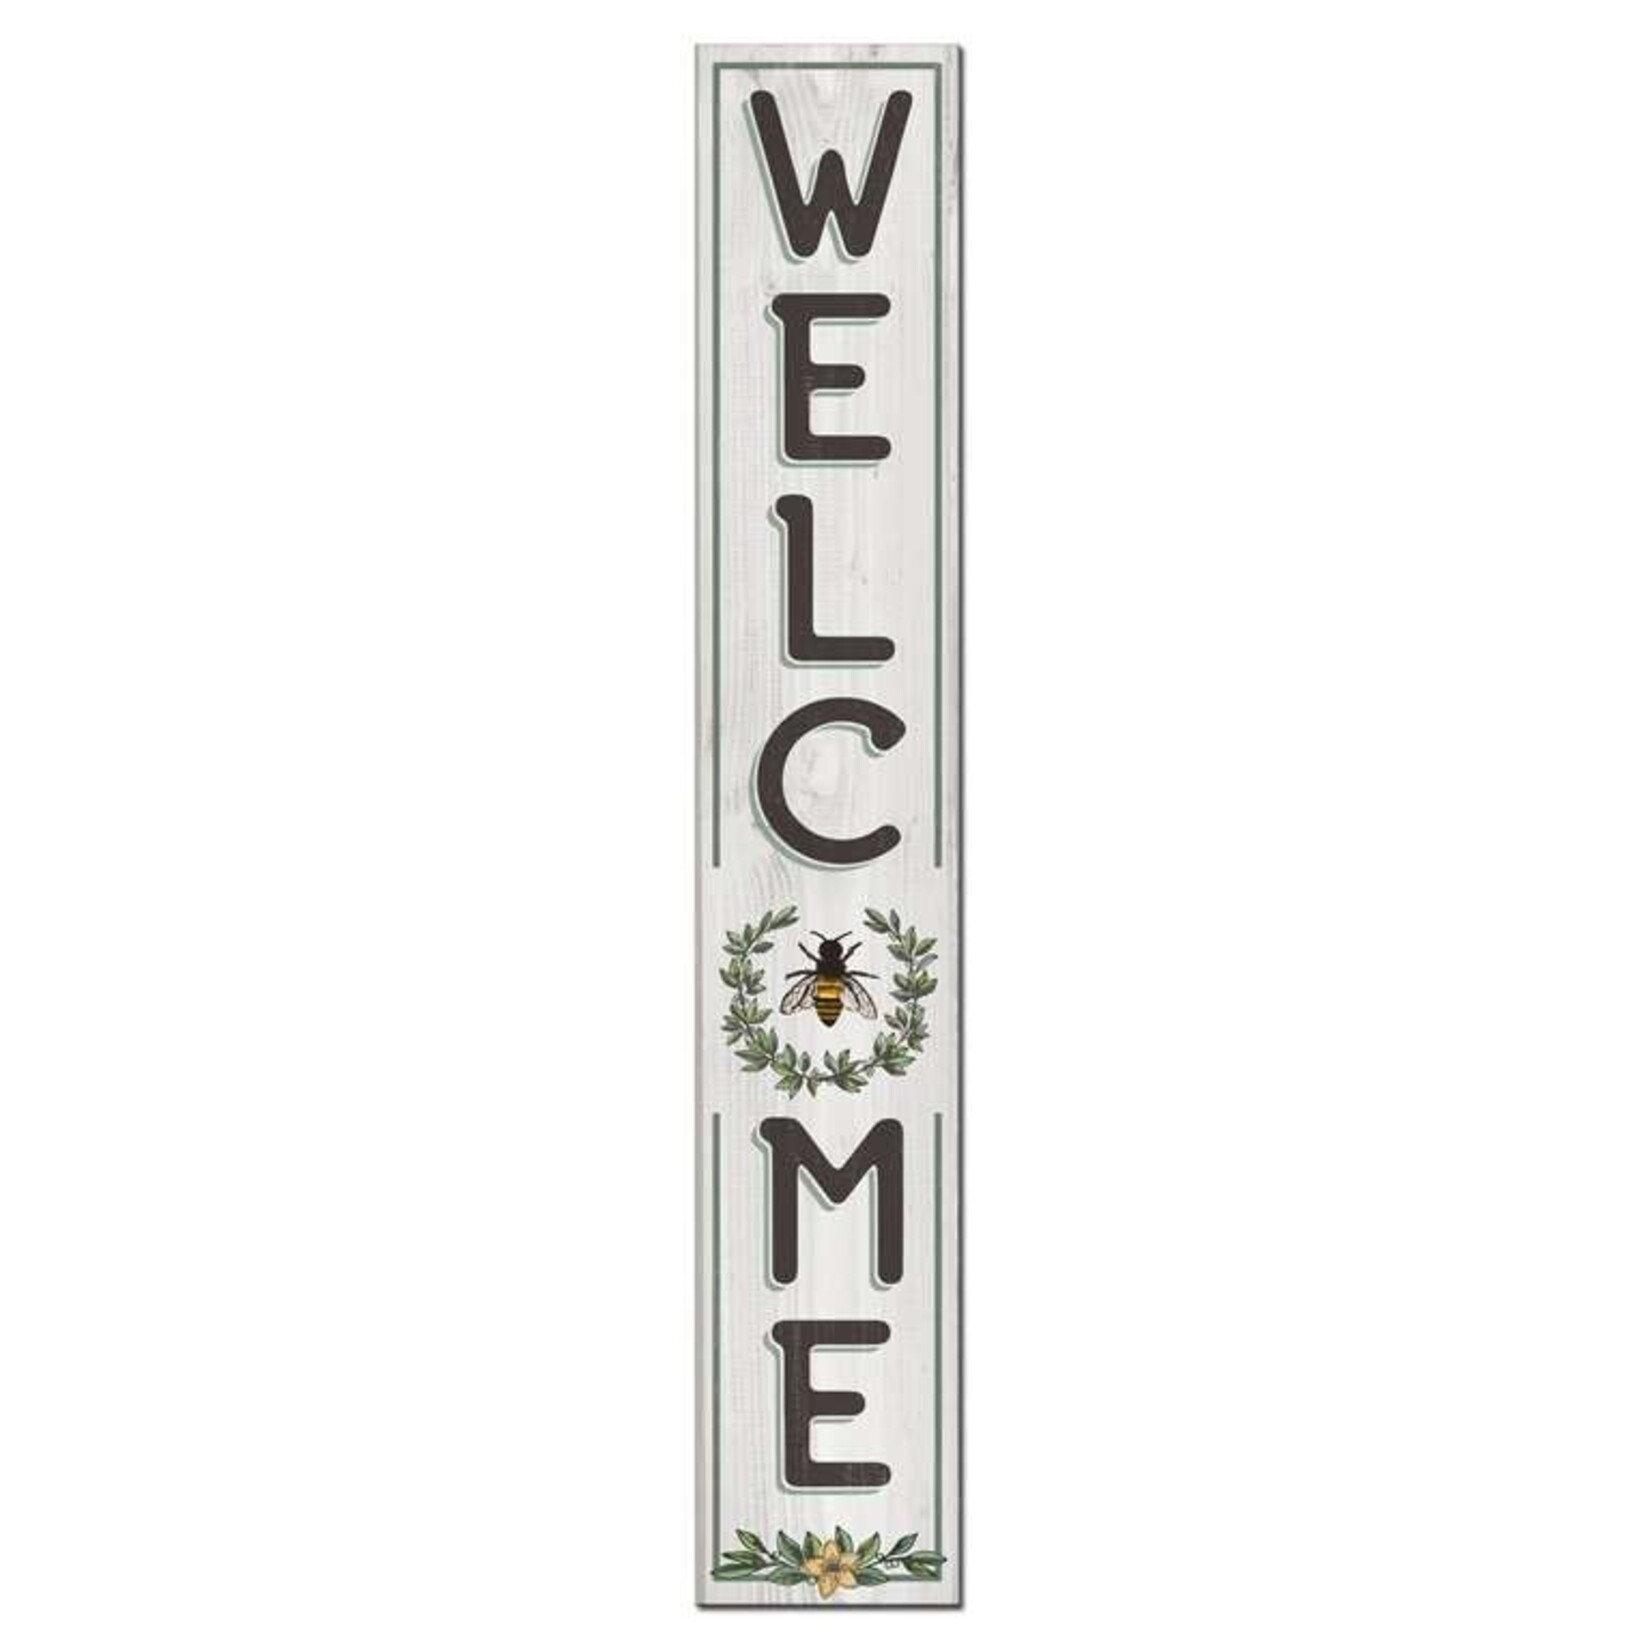 WELCOME - BEE - PORCH BOARD